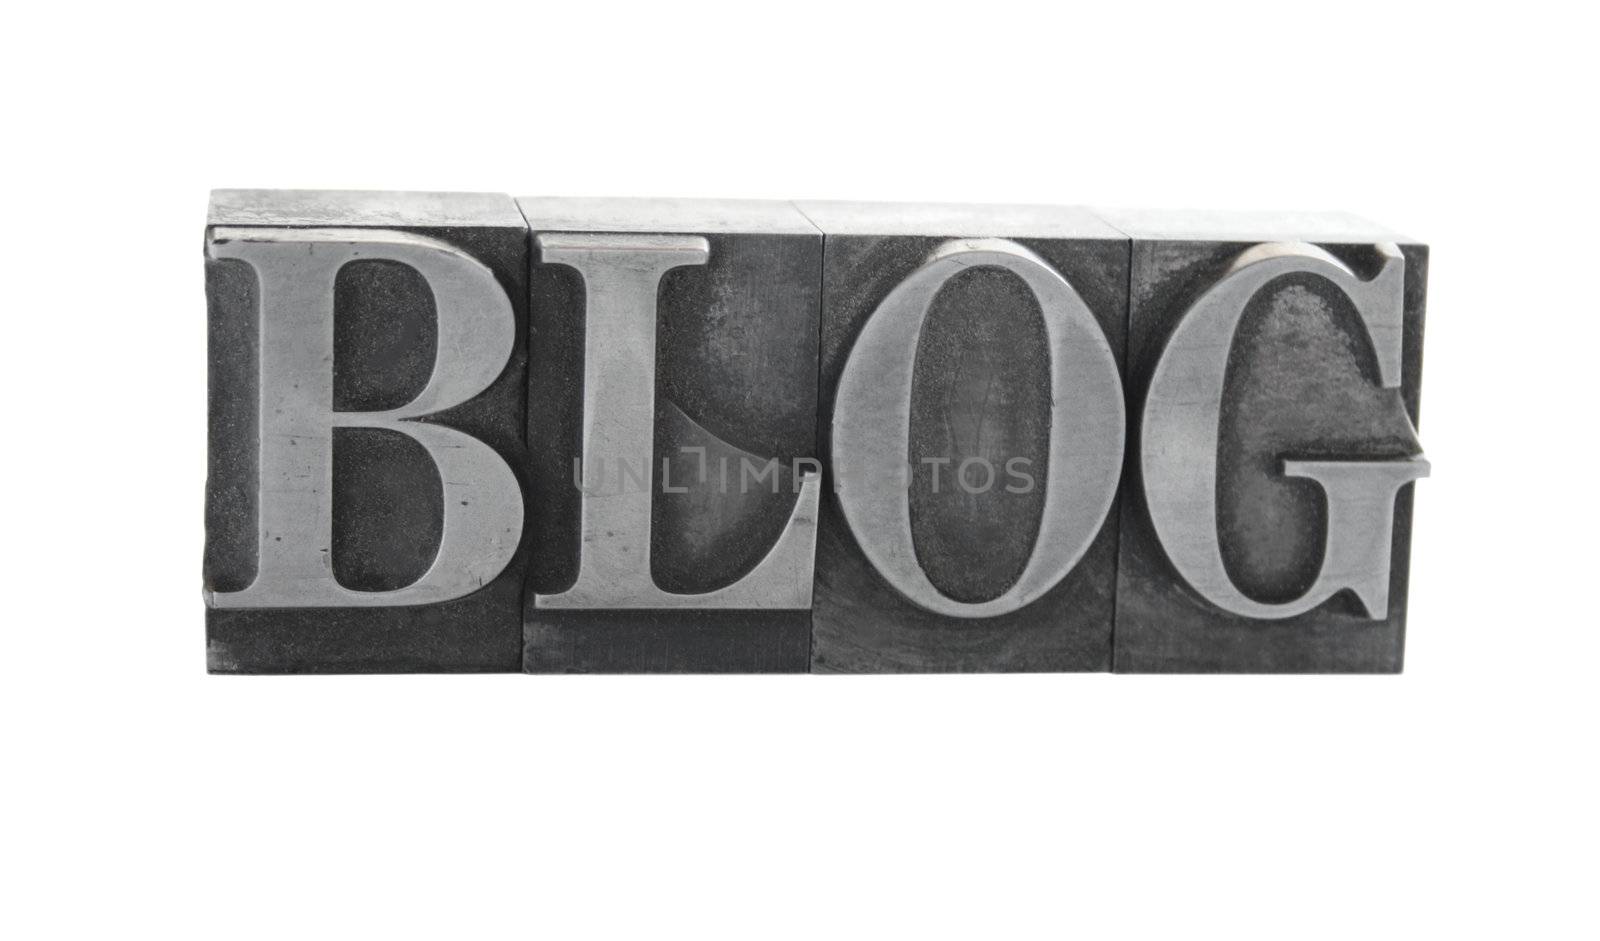 blog in metal letters by nebari